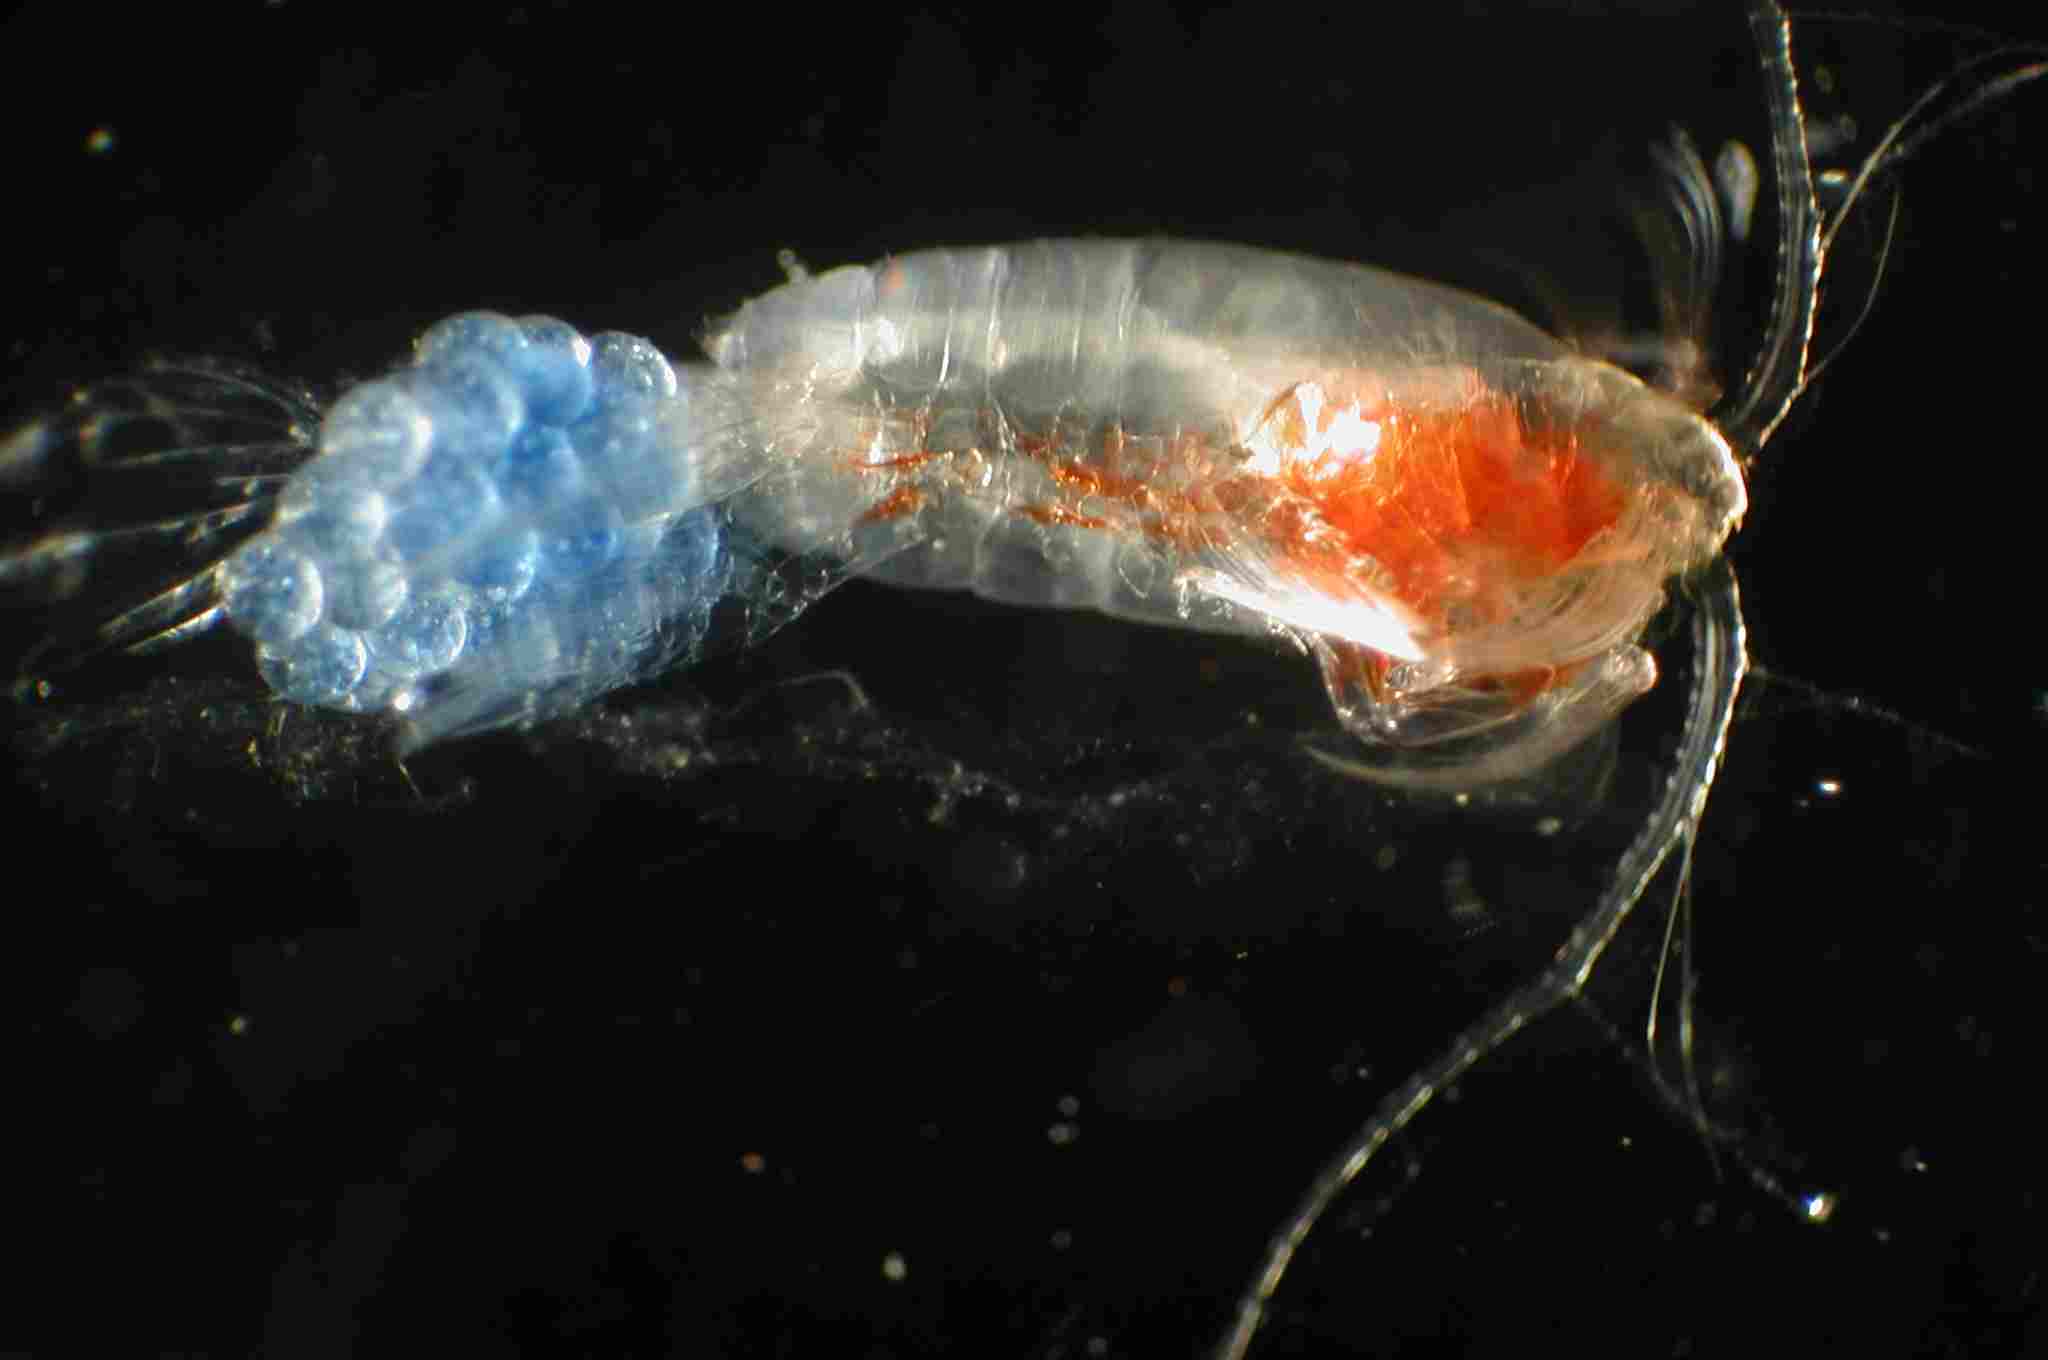 Are Zooplankton Producers or Consumers: The Biological Simplicity of Zooplankton Helps Classify Them as Primary Consumers (Credit: NOAA Photo Library 2013 .CC BY 2.0.)